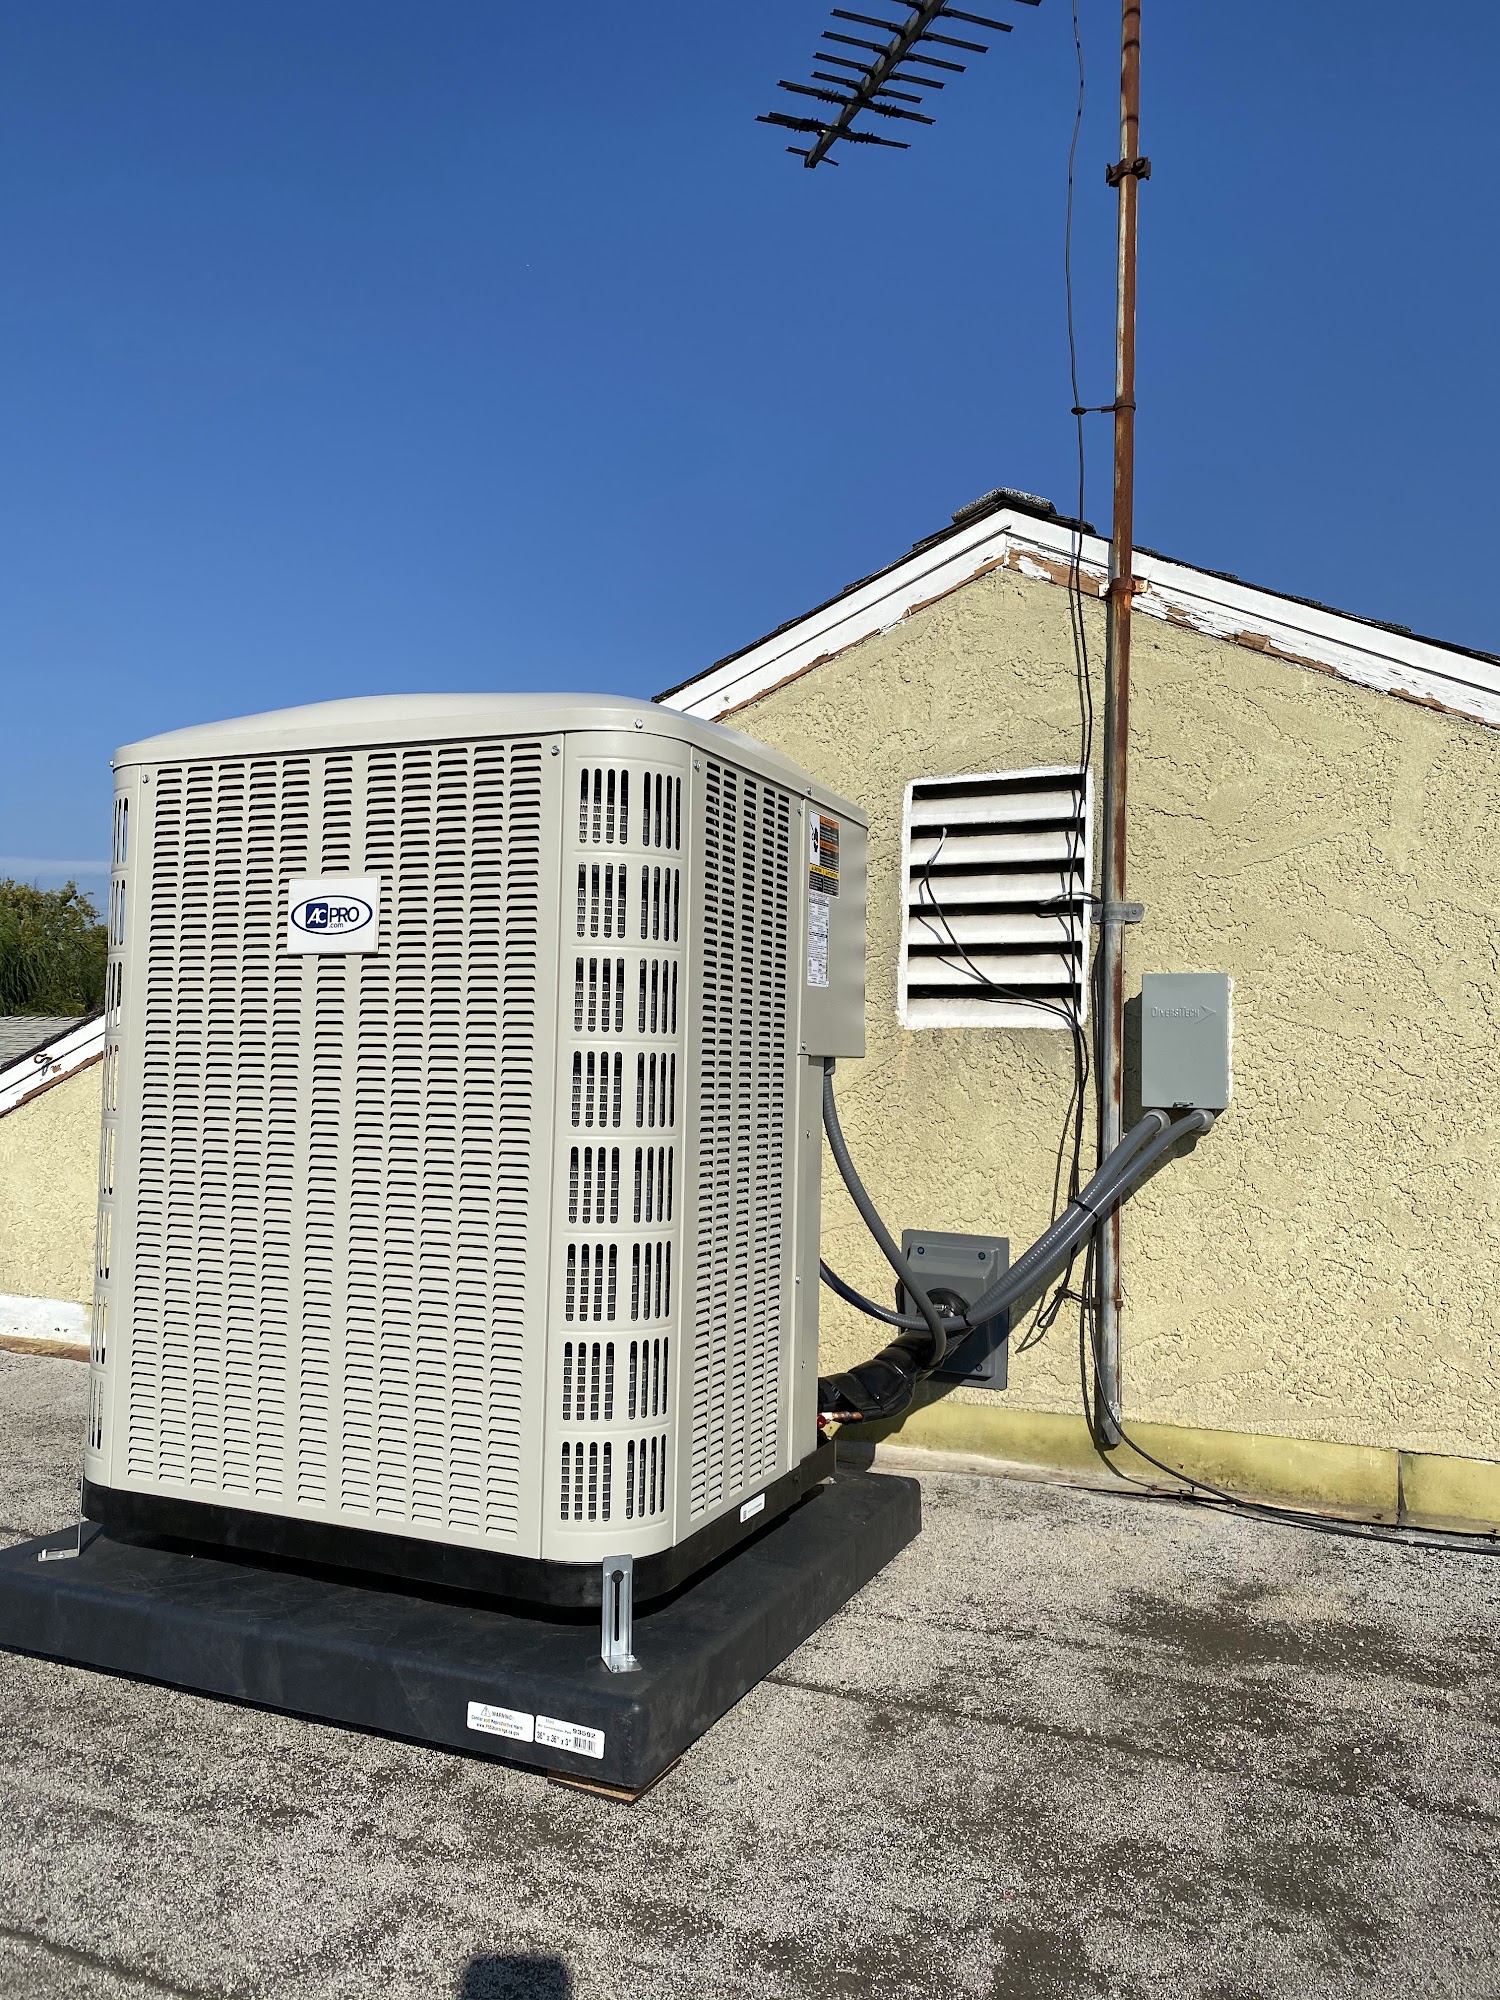 AARD Mechanical Air Conditioning & Heating